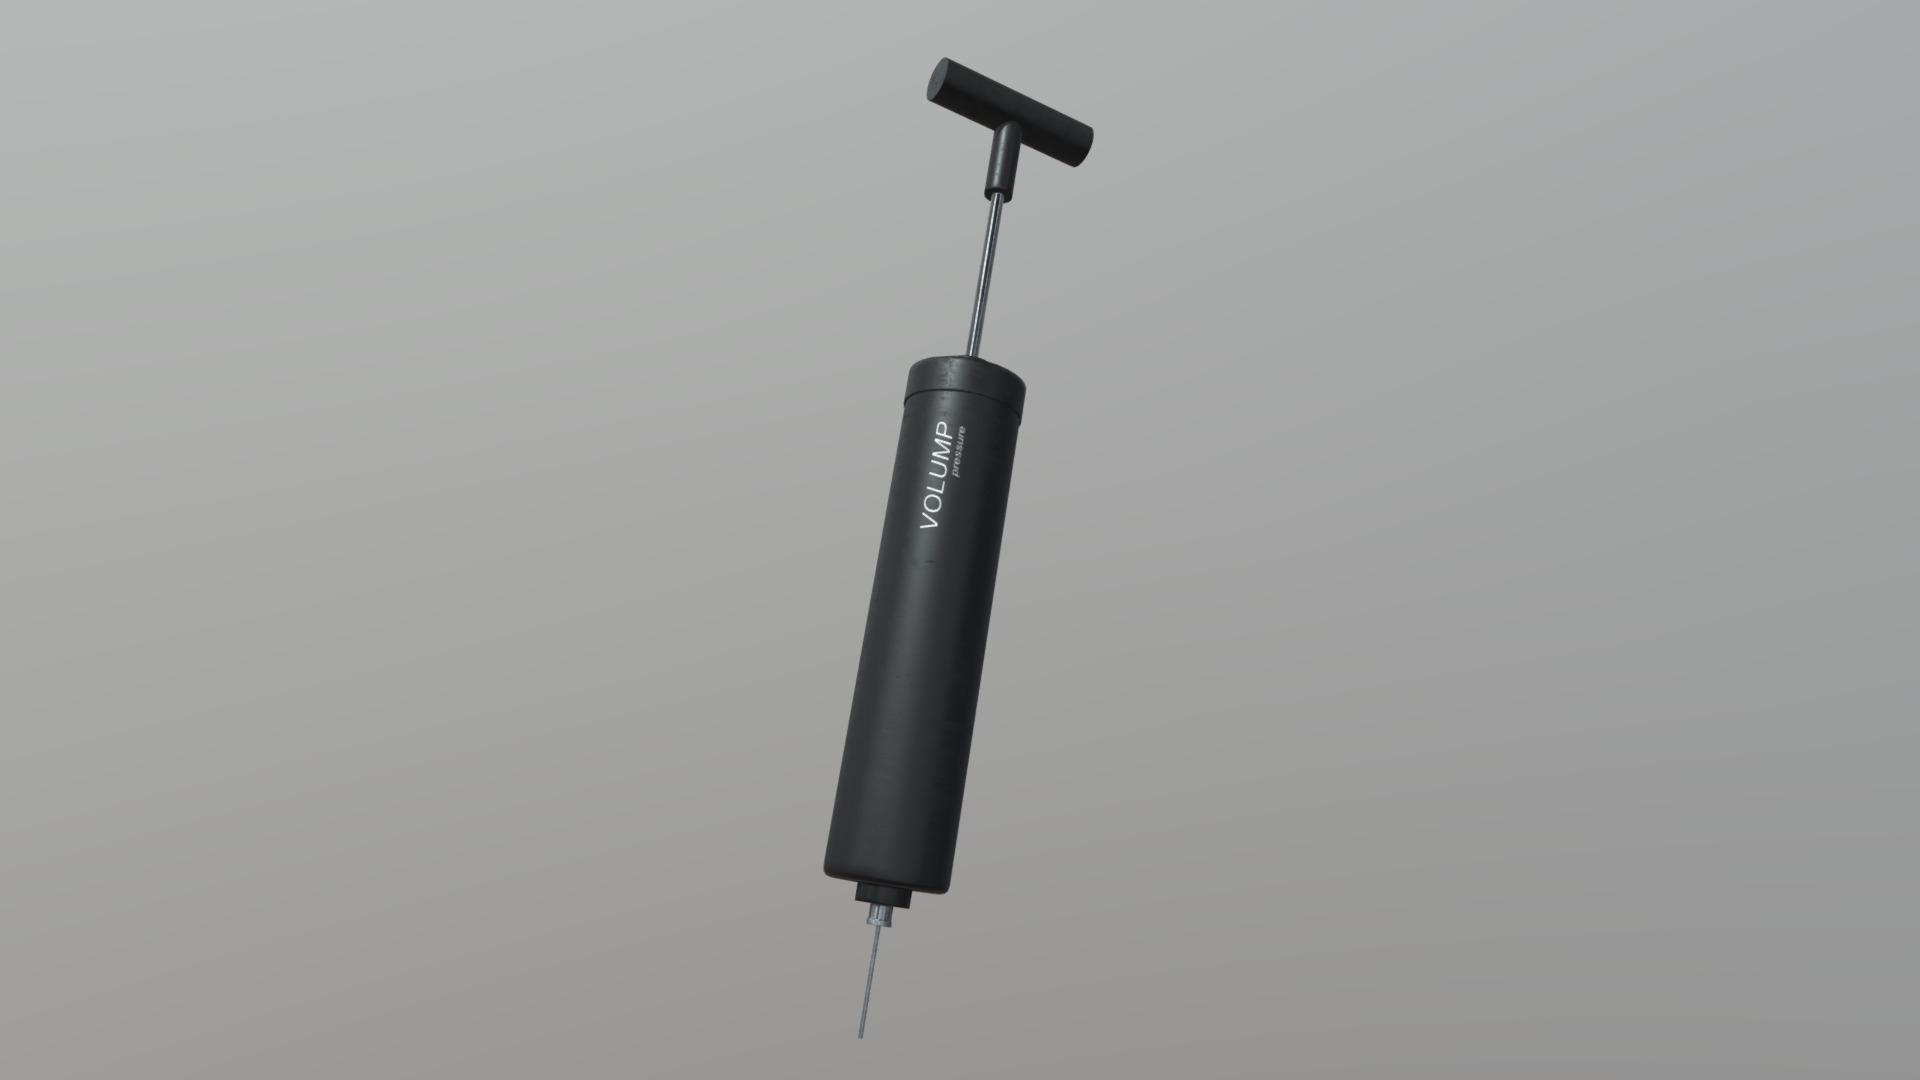 3D model Air Pump 2 - This is a 3D model of the Air Pump 2. The 3D model is about a black and white flashlight.